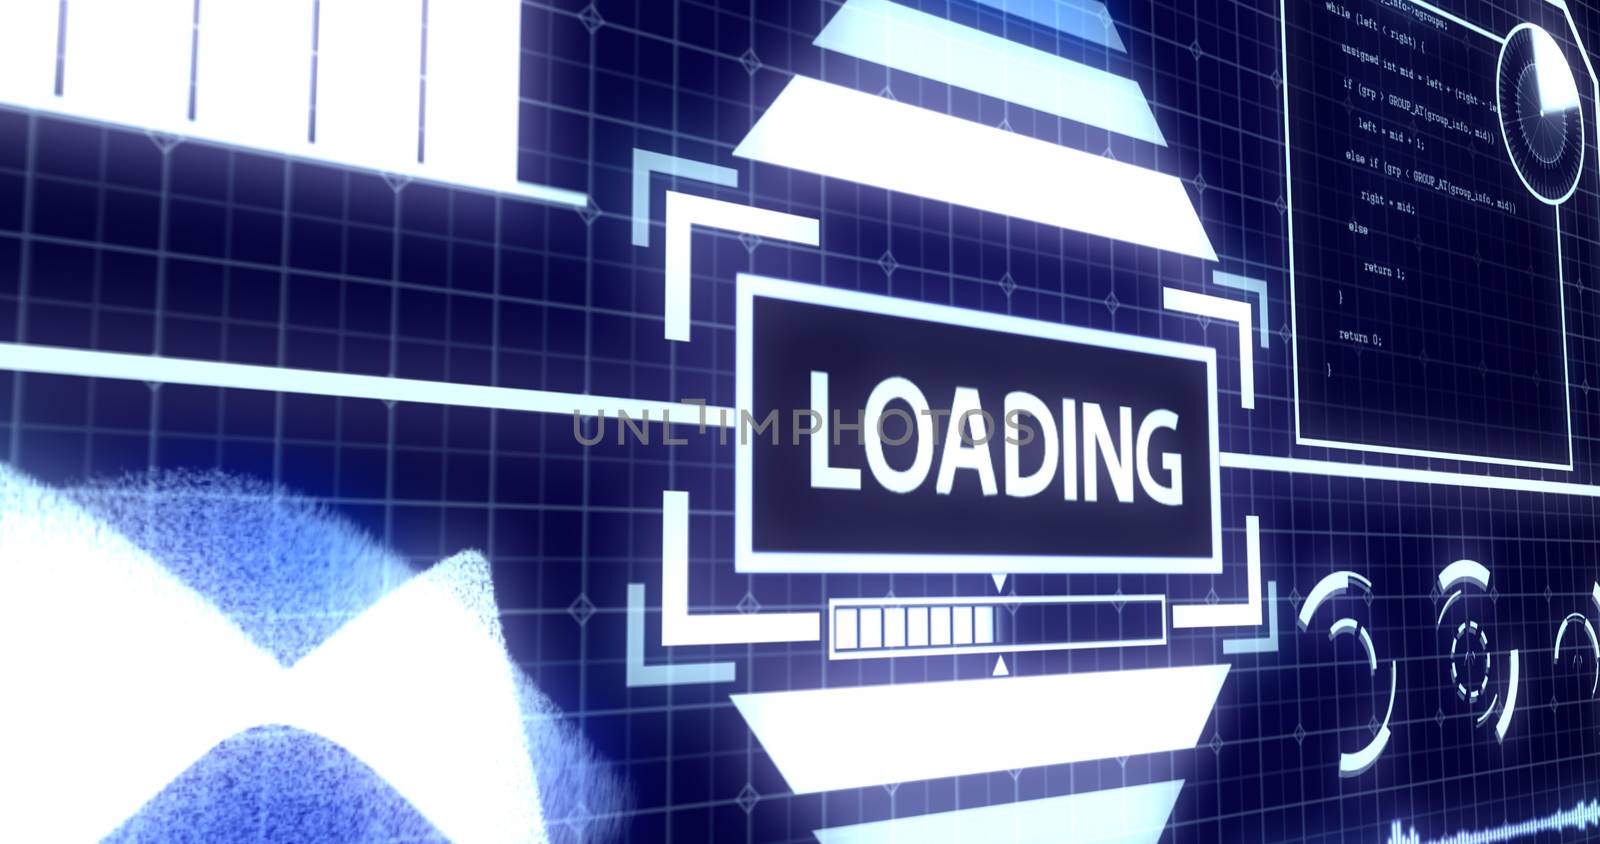 Loading Screen with Process Bar and Digital objects including Soundwave, Graph, Chart, Circles, Radar, Hacker typing and Glowing light bars Ver.2 by ariya23156